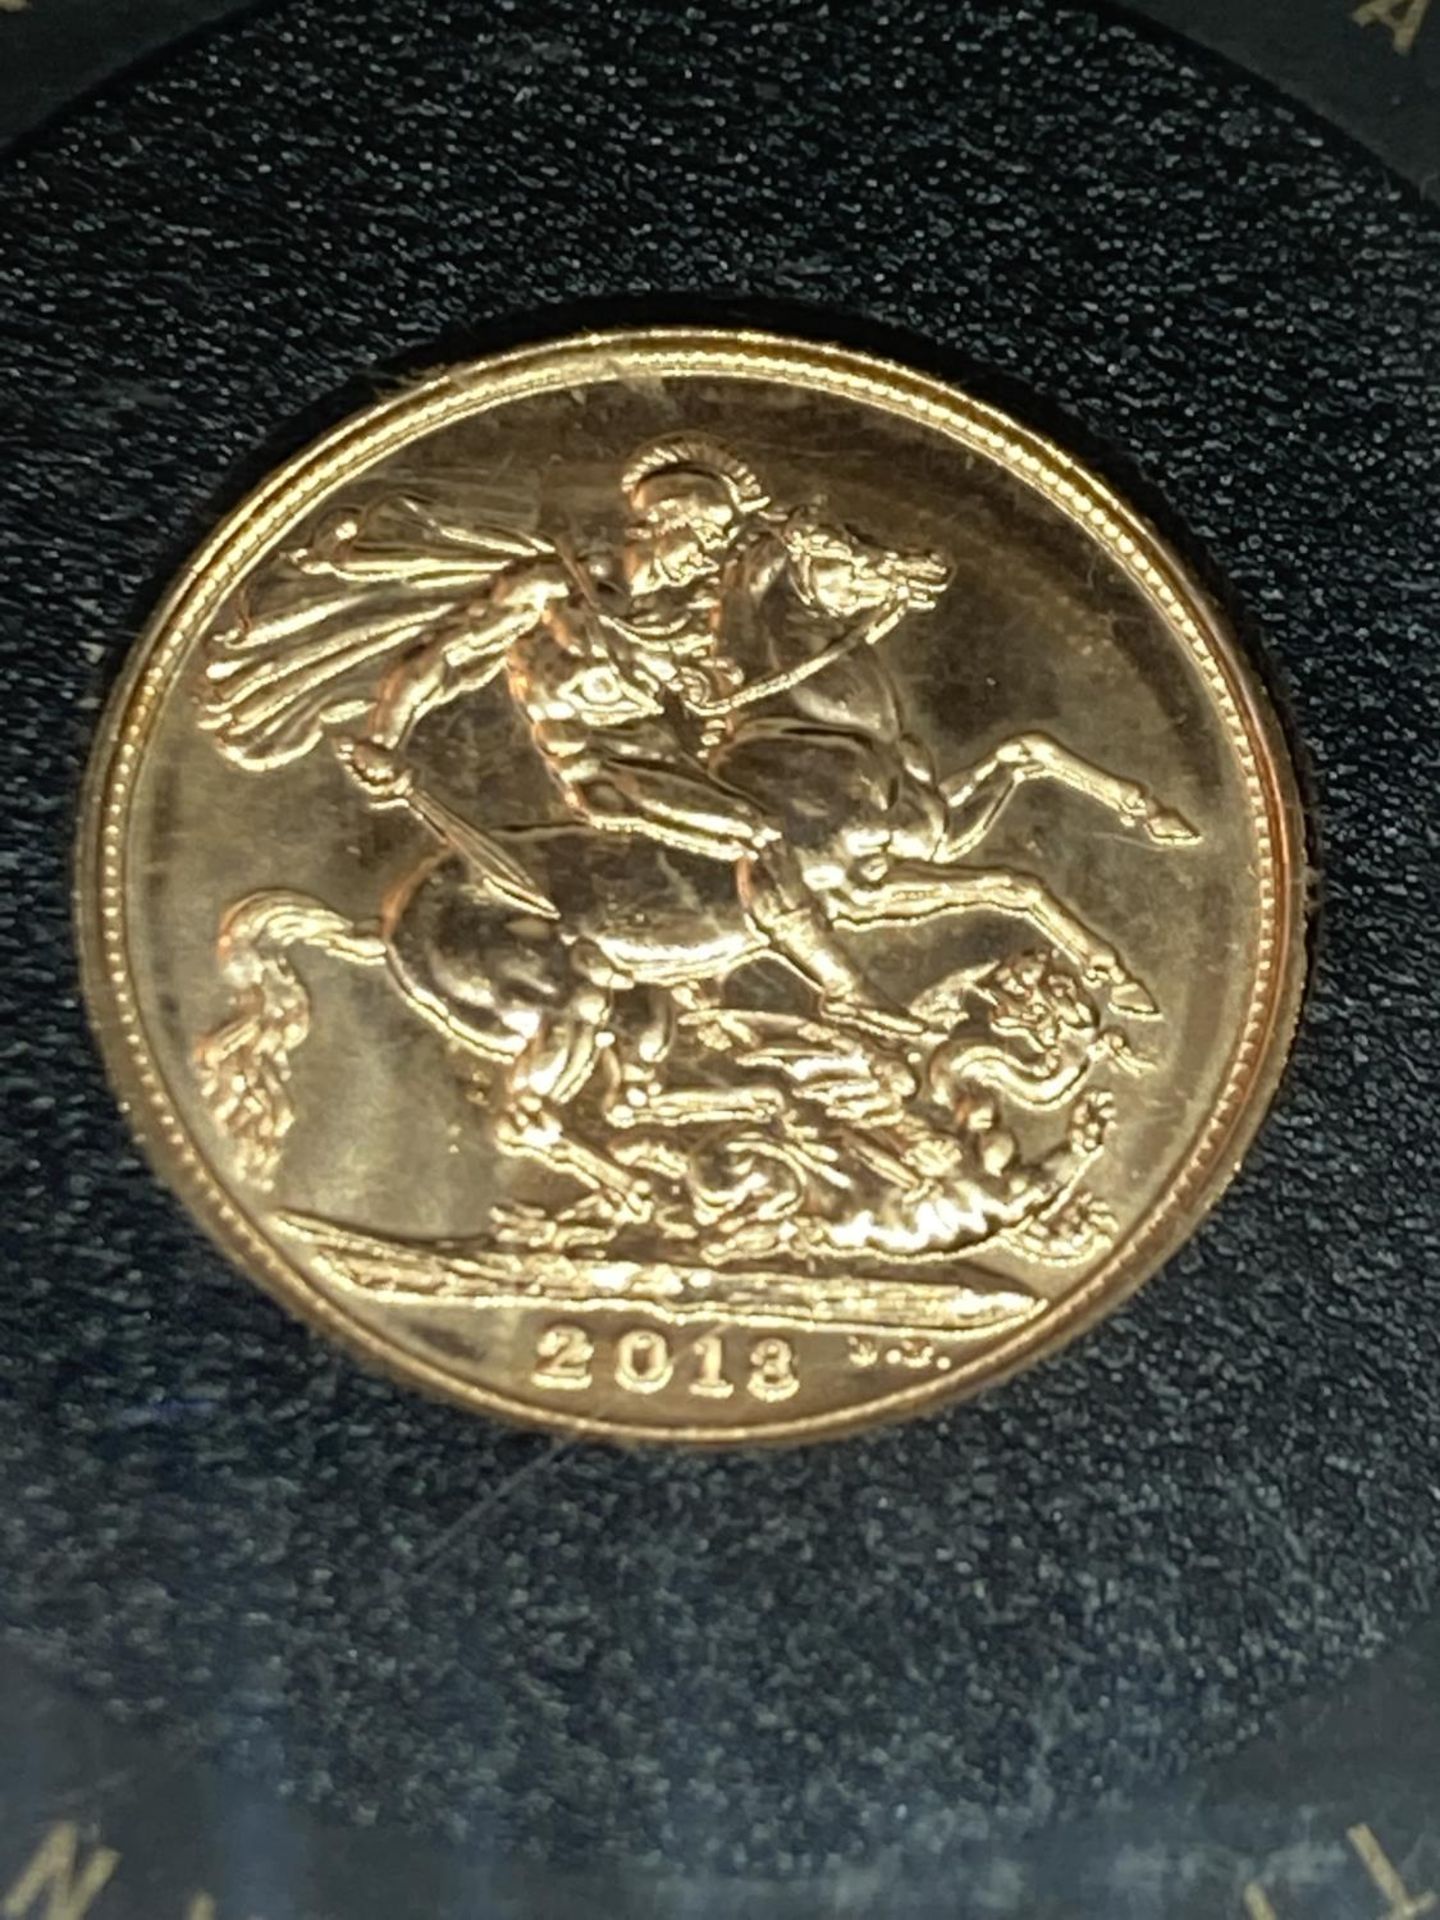 A 2013 GOLD SOVEREIGN WITH CERTIFICATE OF AUTHENTICITY - Image 2 of 3